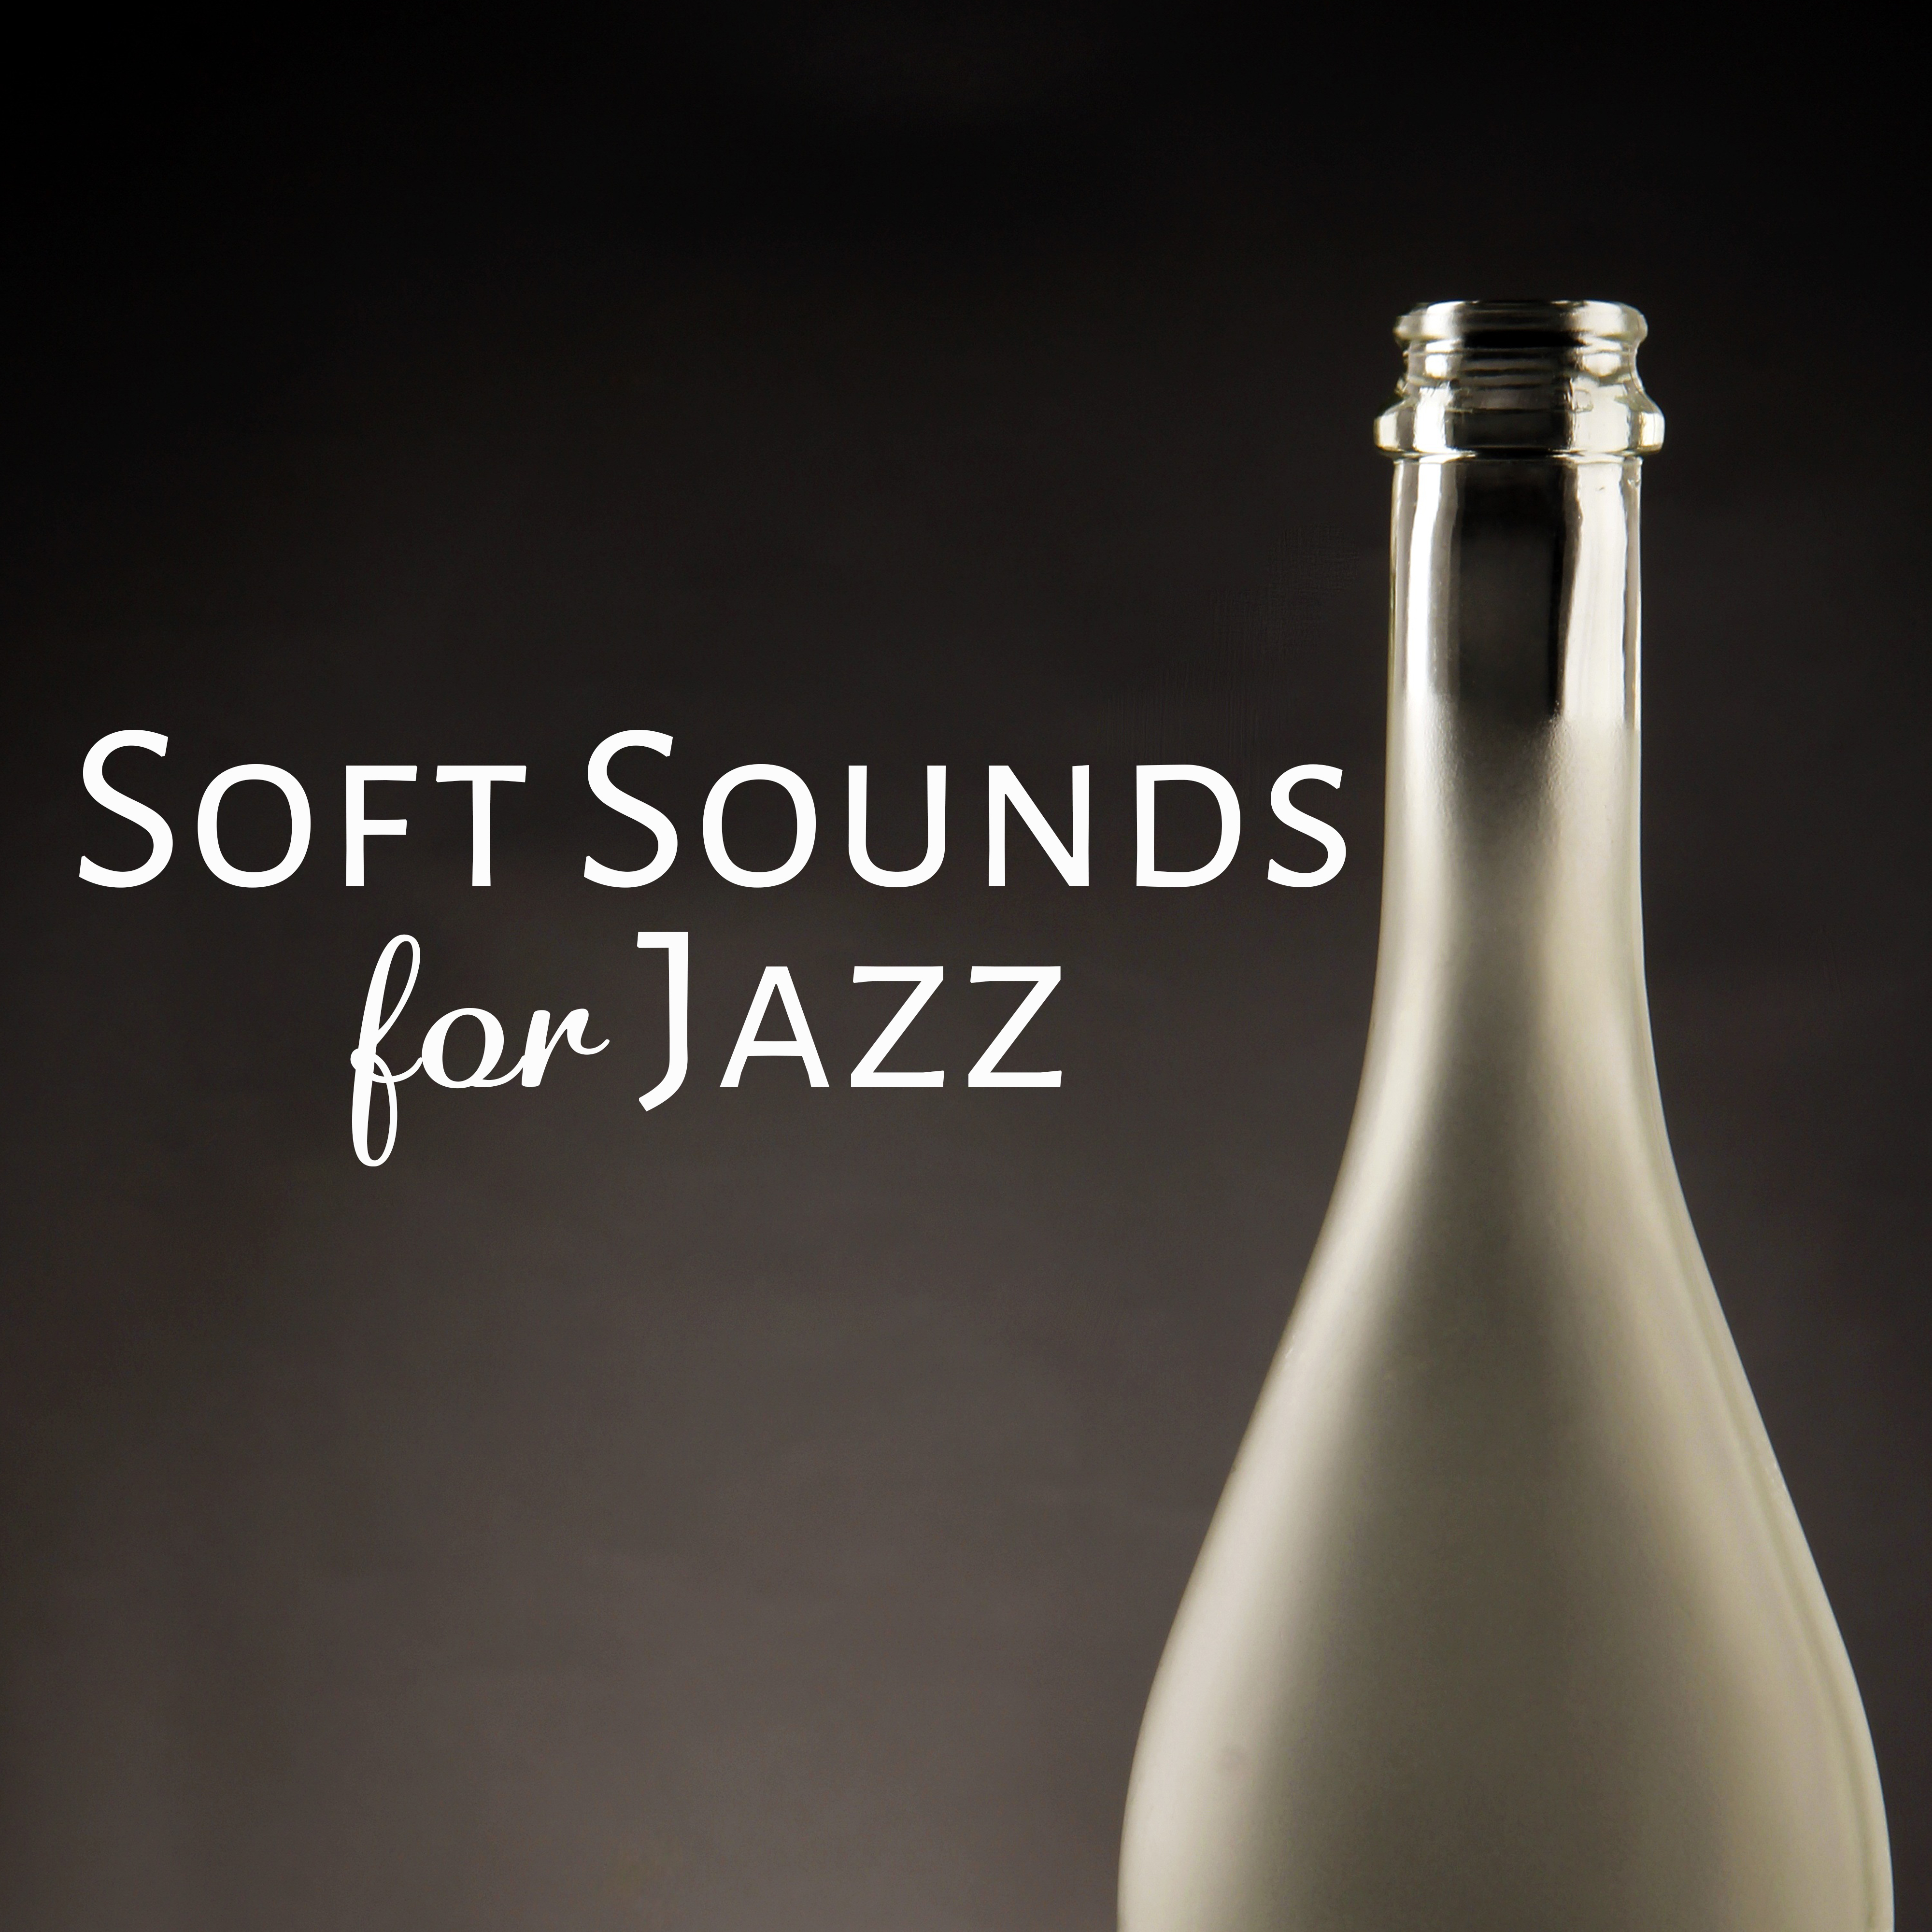 Soft Sounds for Jazz  Relaxing Therapy at Night, Gentle Piano Bar, Cocktails  Drinks, Chilled Jazz, Dinner with Friends, Smooth Jazz